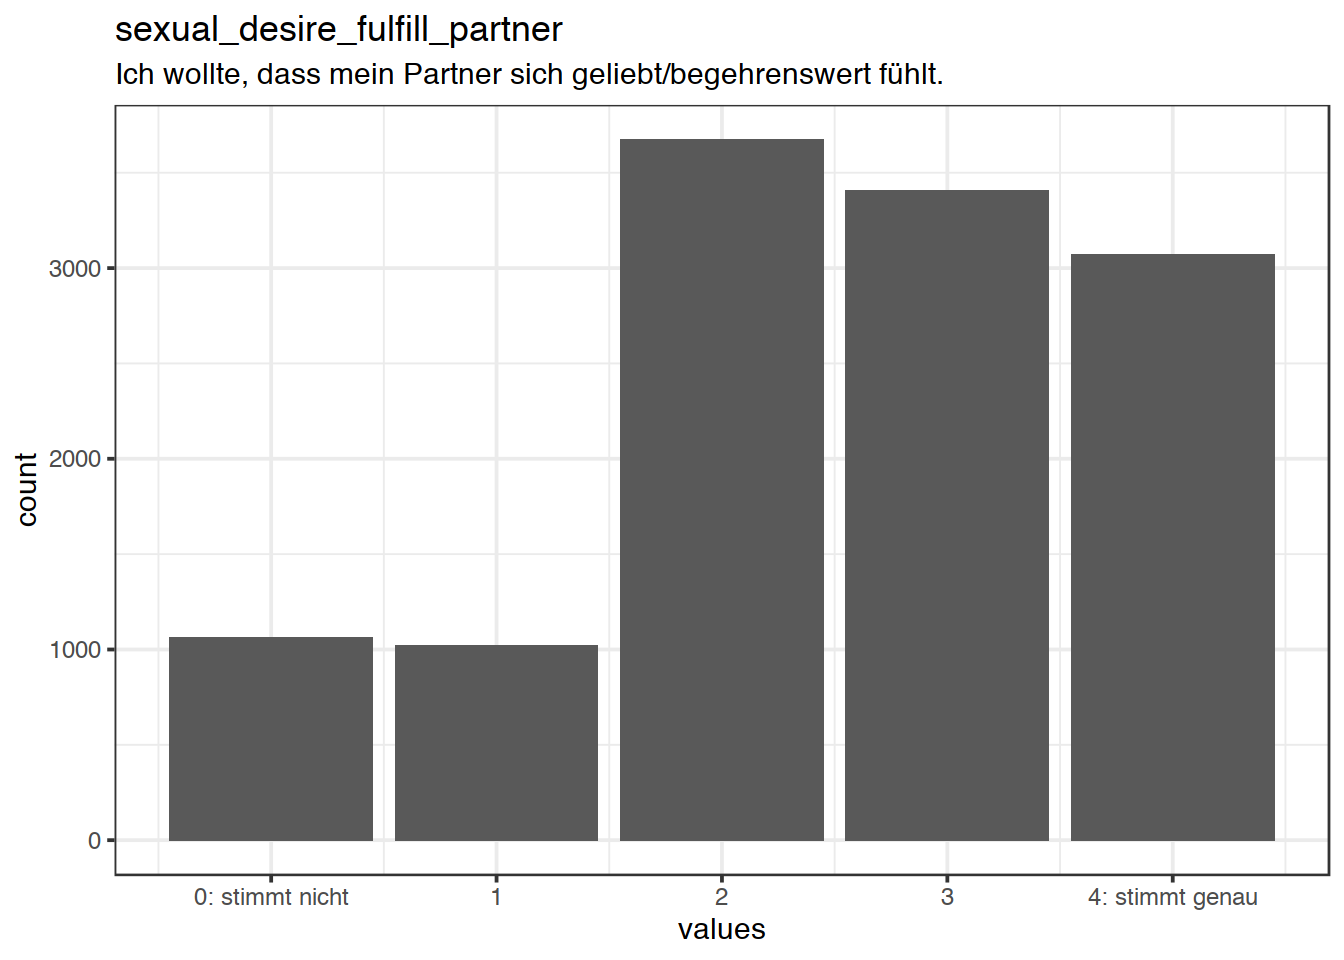 Distribution of values for sexual_desire_fulfill_partner